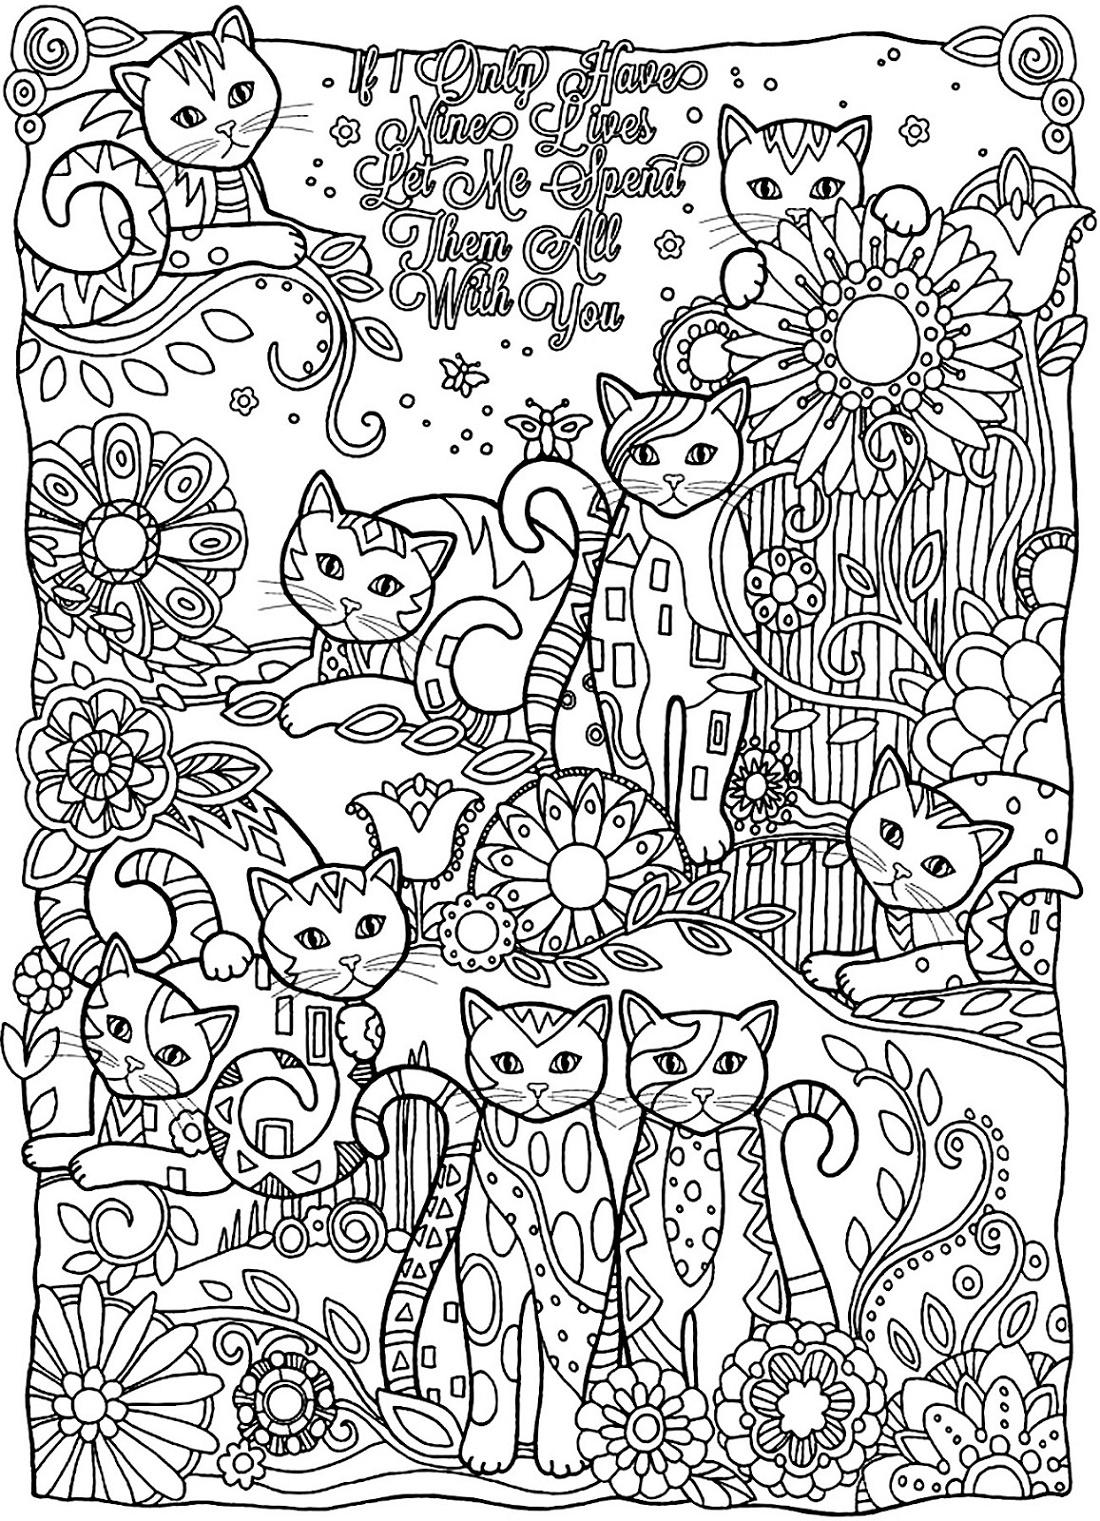 Cat Coloring Book For Adults